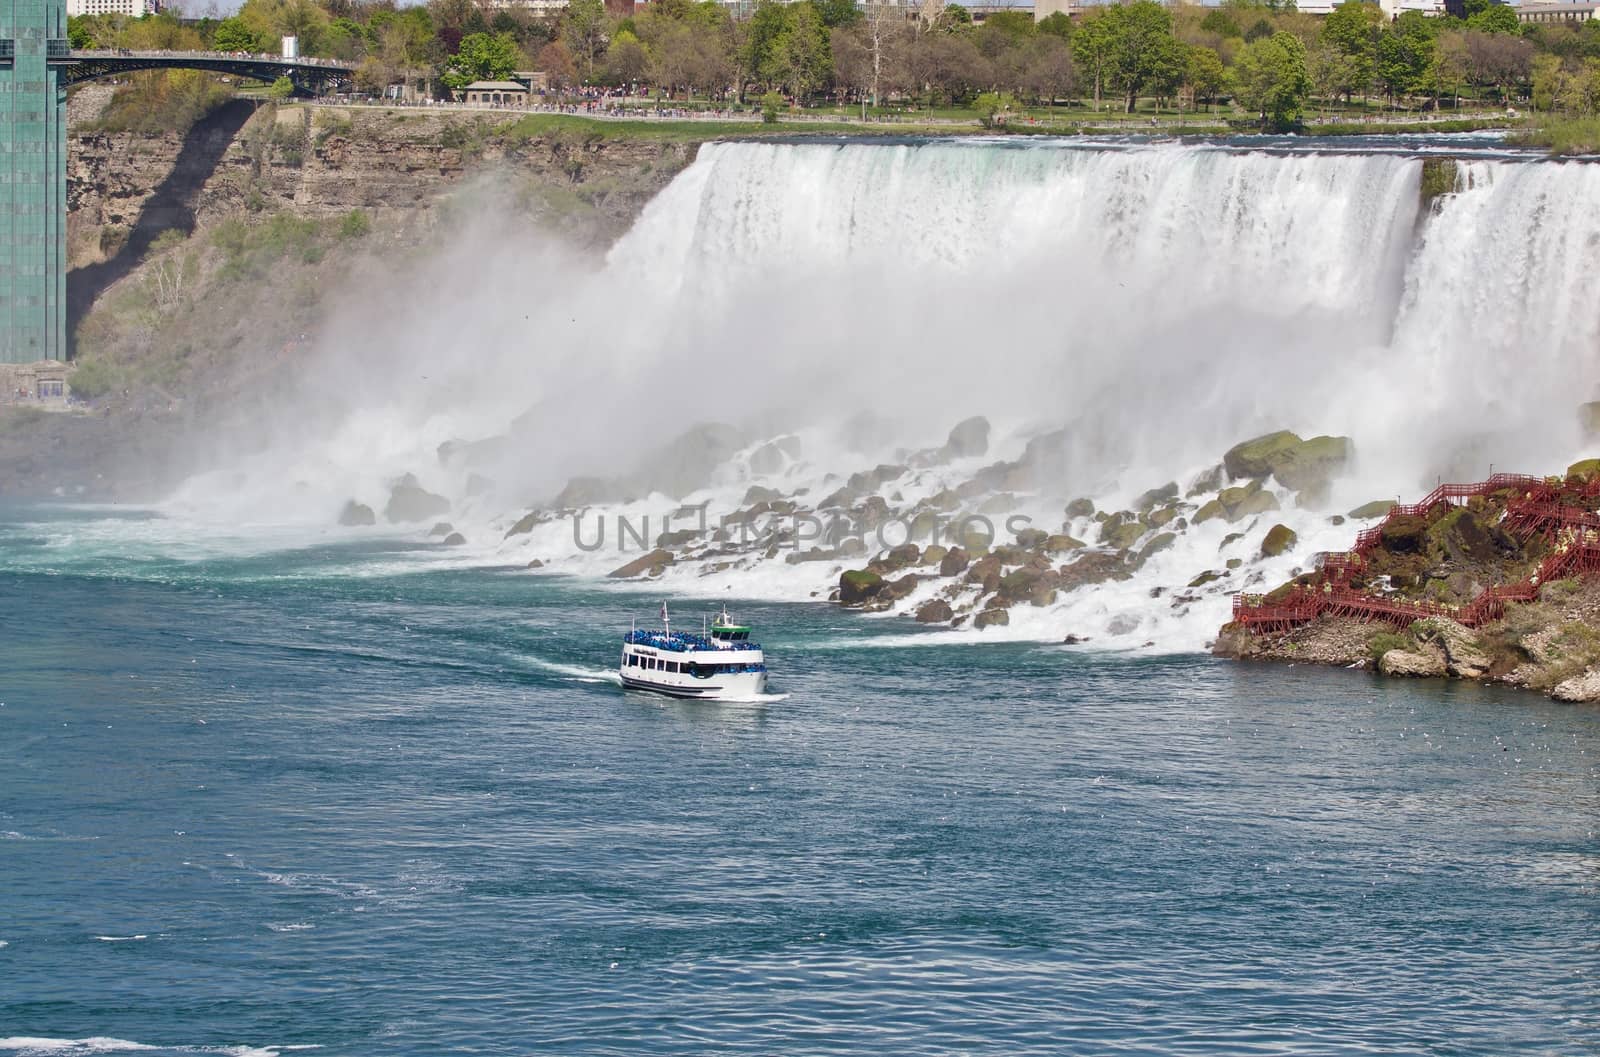 Beautiful picture with a ship and amazing Niagara waterfall by teo